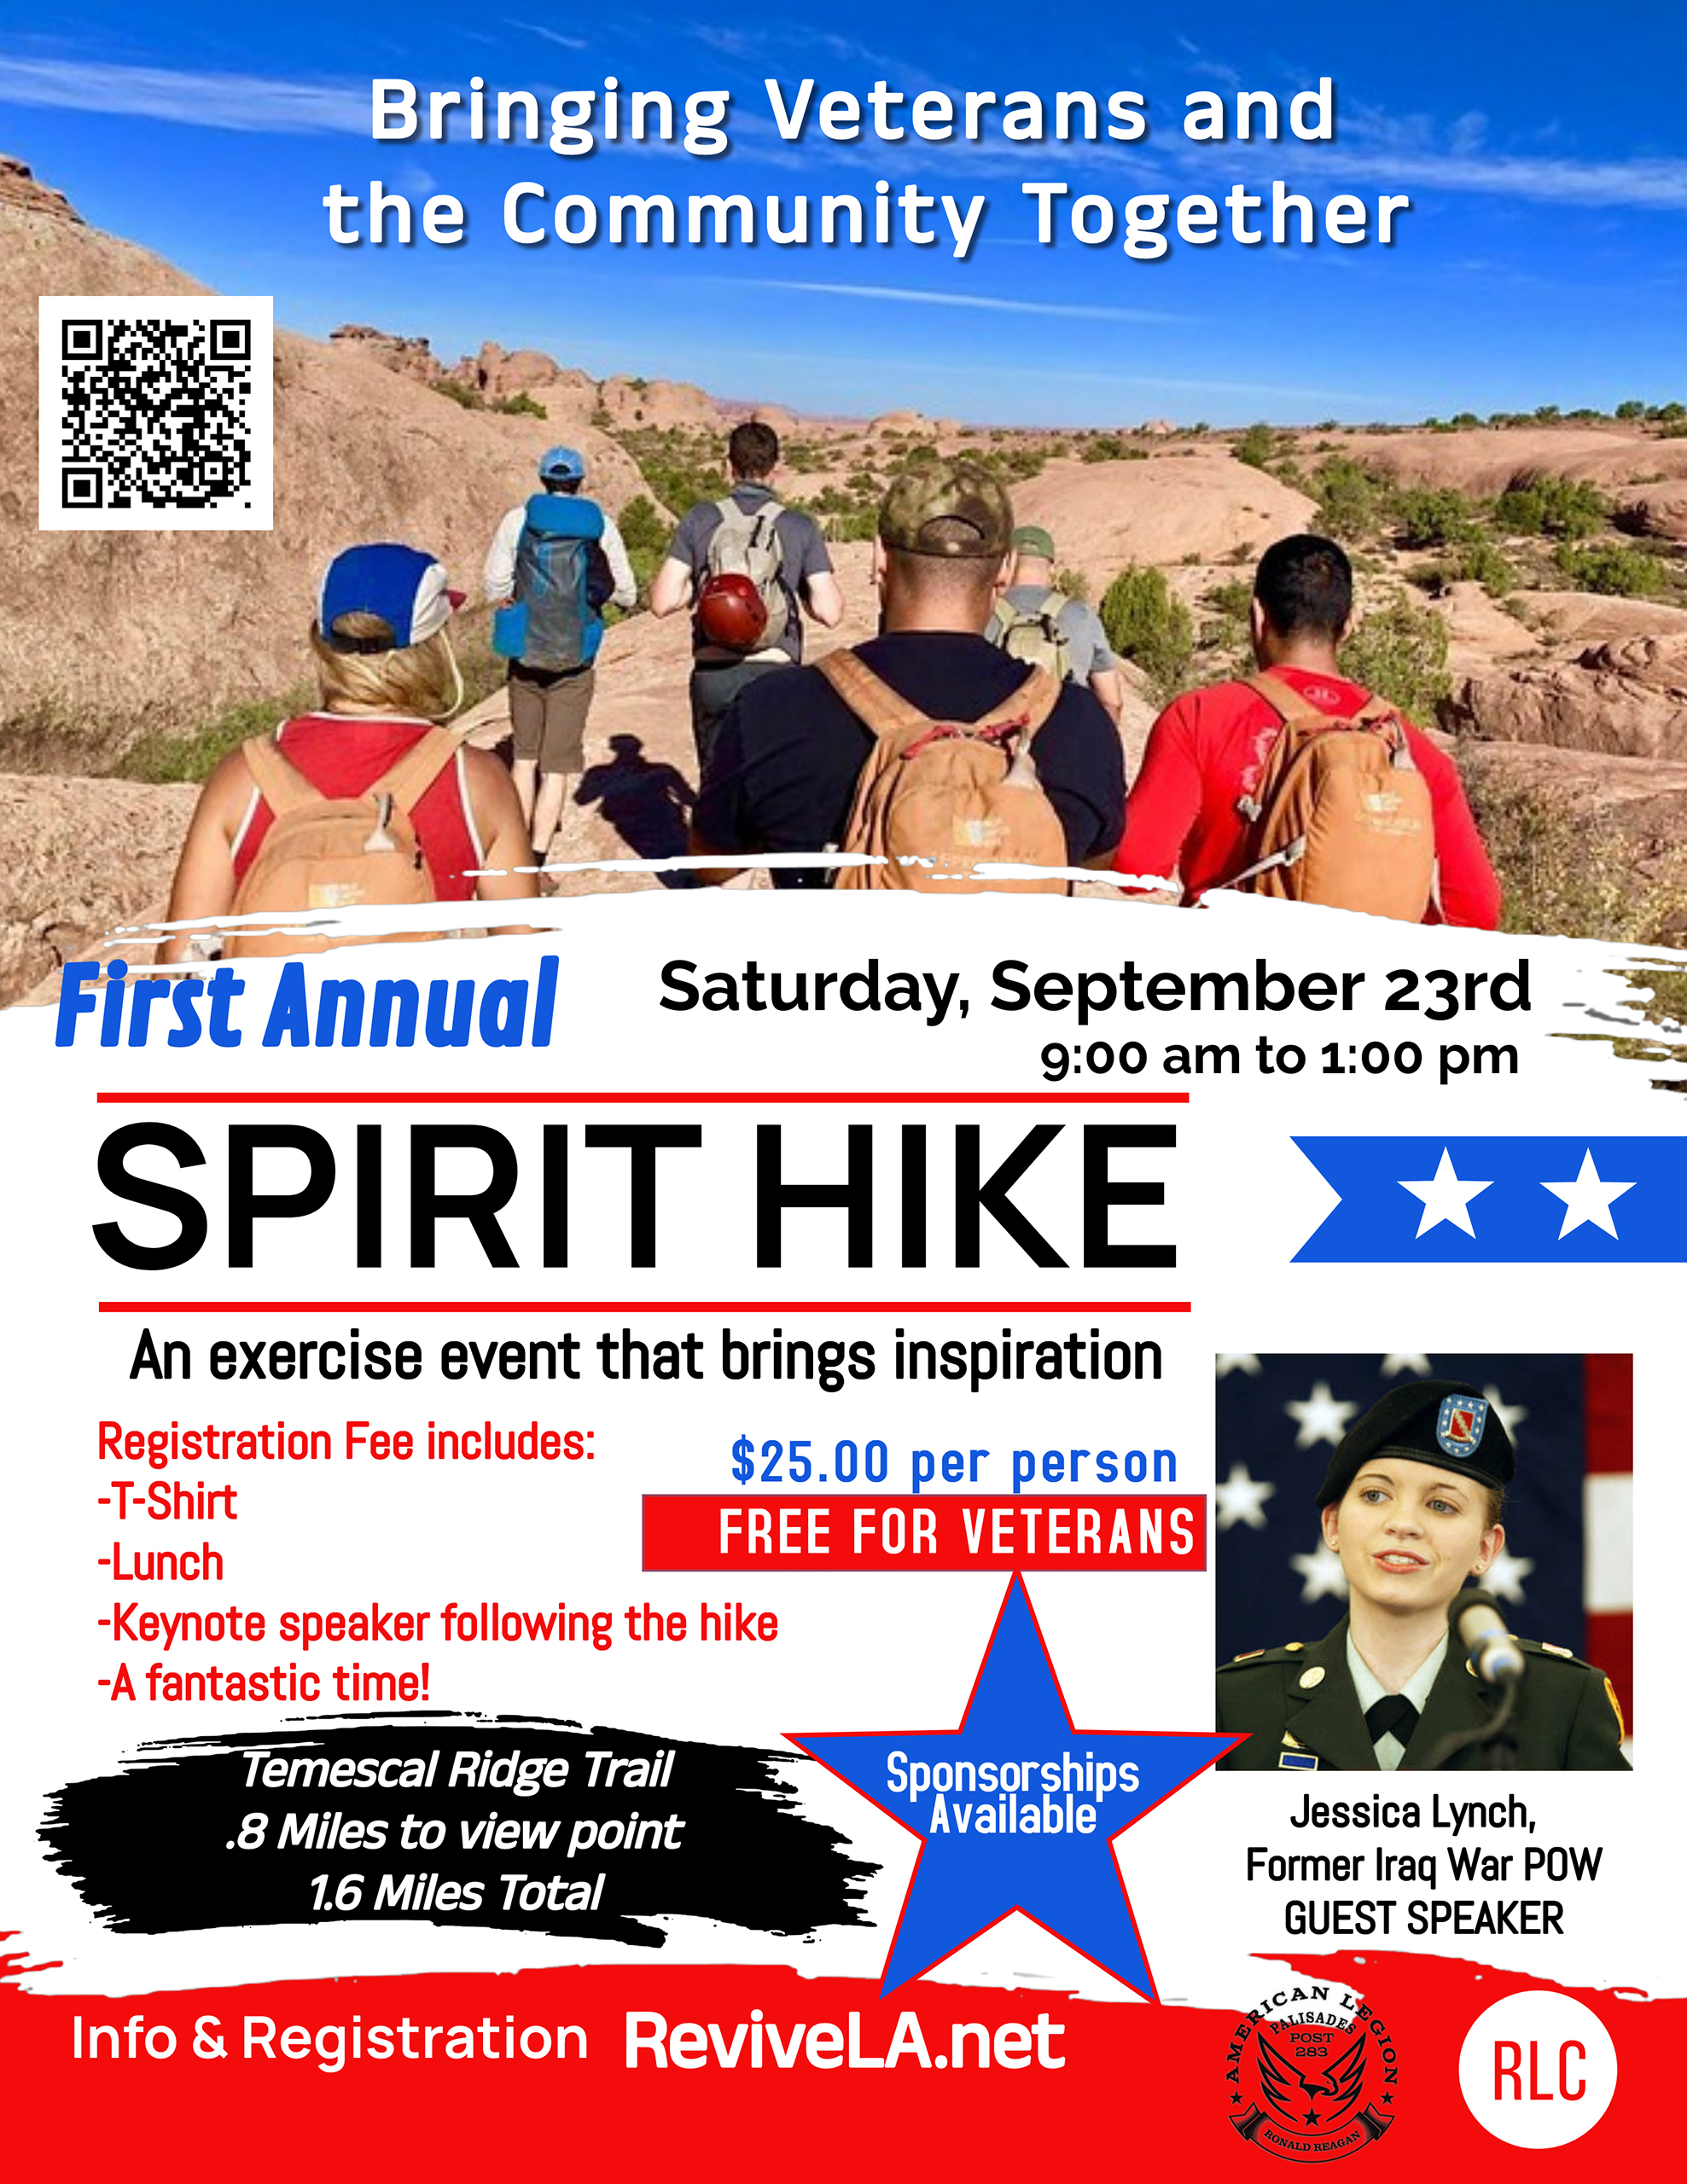 The First Annual Spirit Hike: Bringing Veterans and the Community Together